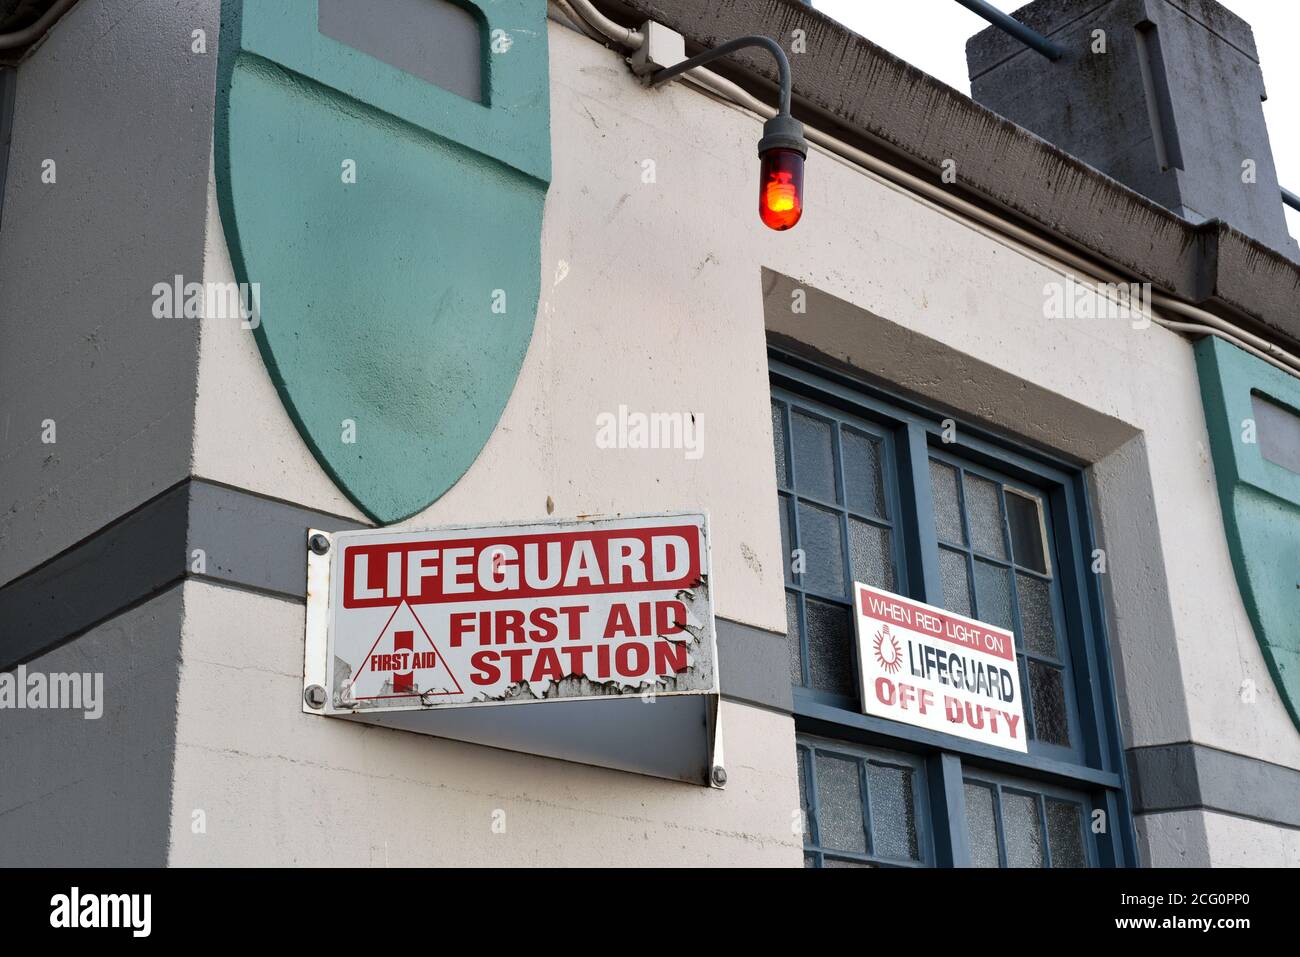 A lifeguard station at English Bay beach in Vancouver, British Columbia, Canada. A sign informs that when the red light is on, as in the photo, the li Stock Photo